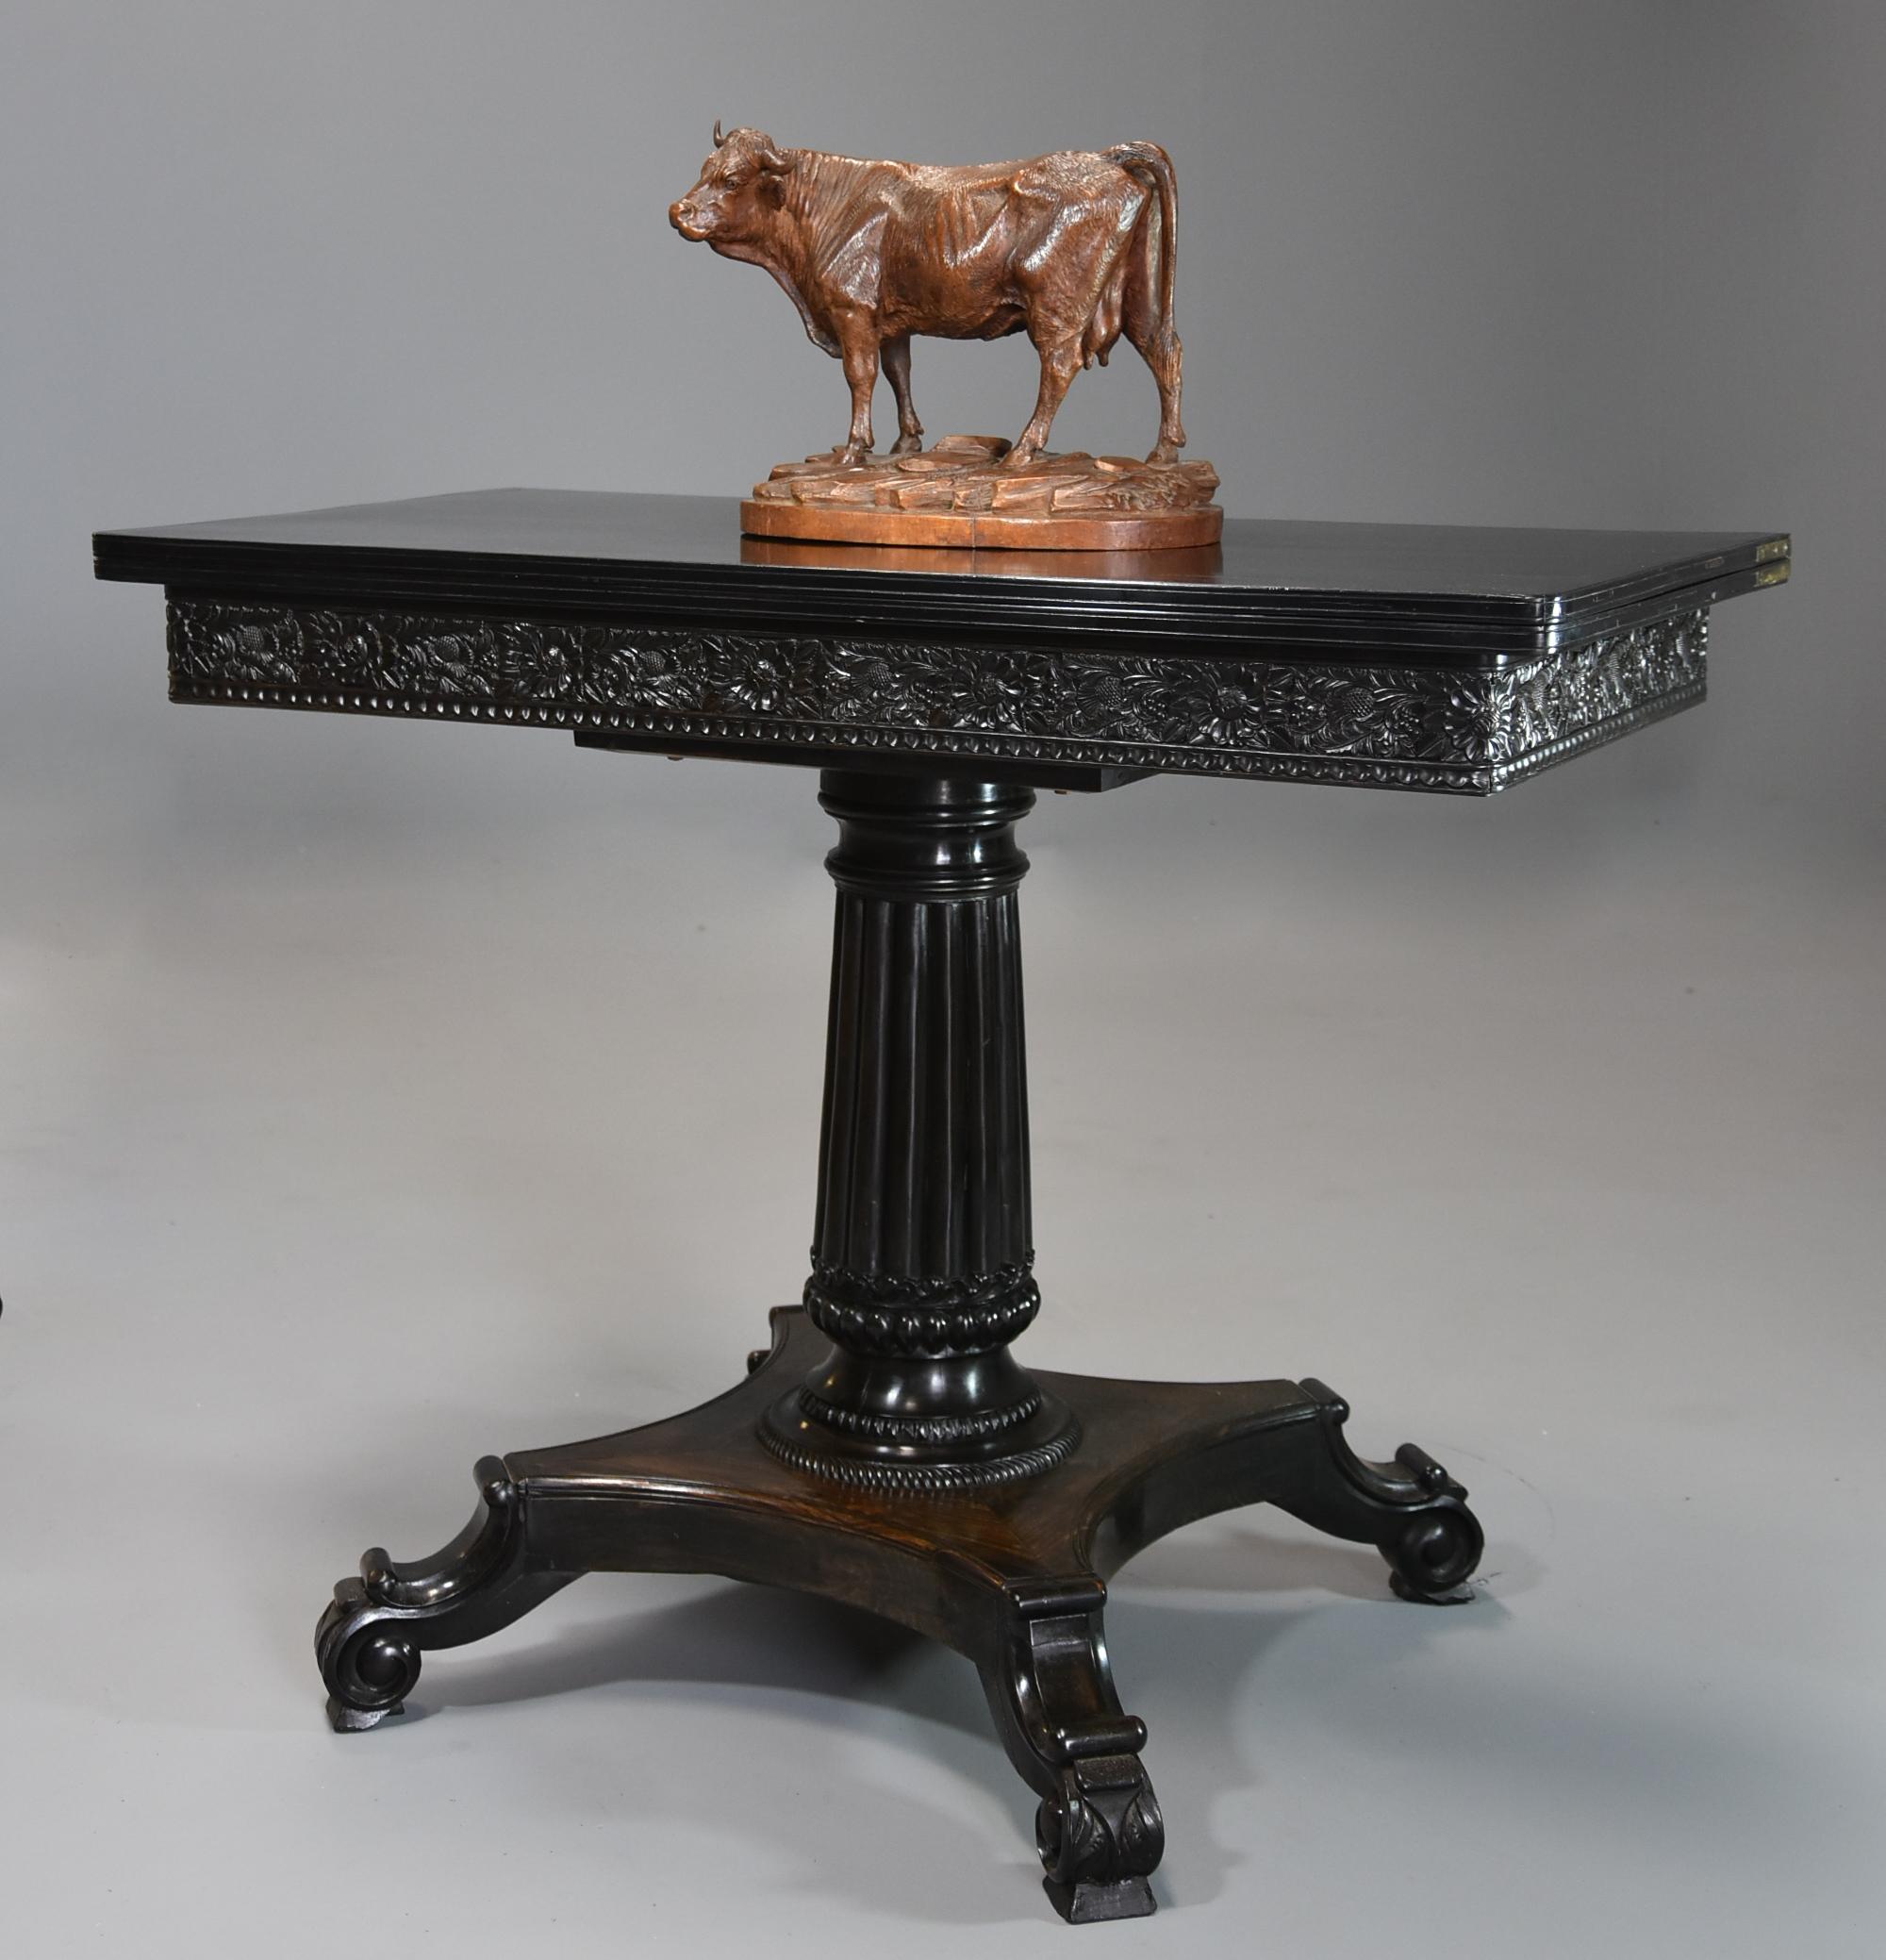 A rare early to mid-19th century (circa 1830) Ceylonese solid ebony card or games table from the Galle district (formerly Ceylon, now Sri Lanka).

This wonderful table consists of a solid ebony top with a moulded edge, the top opening to reveal a